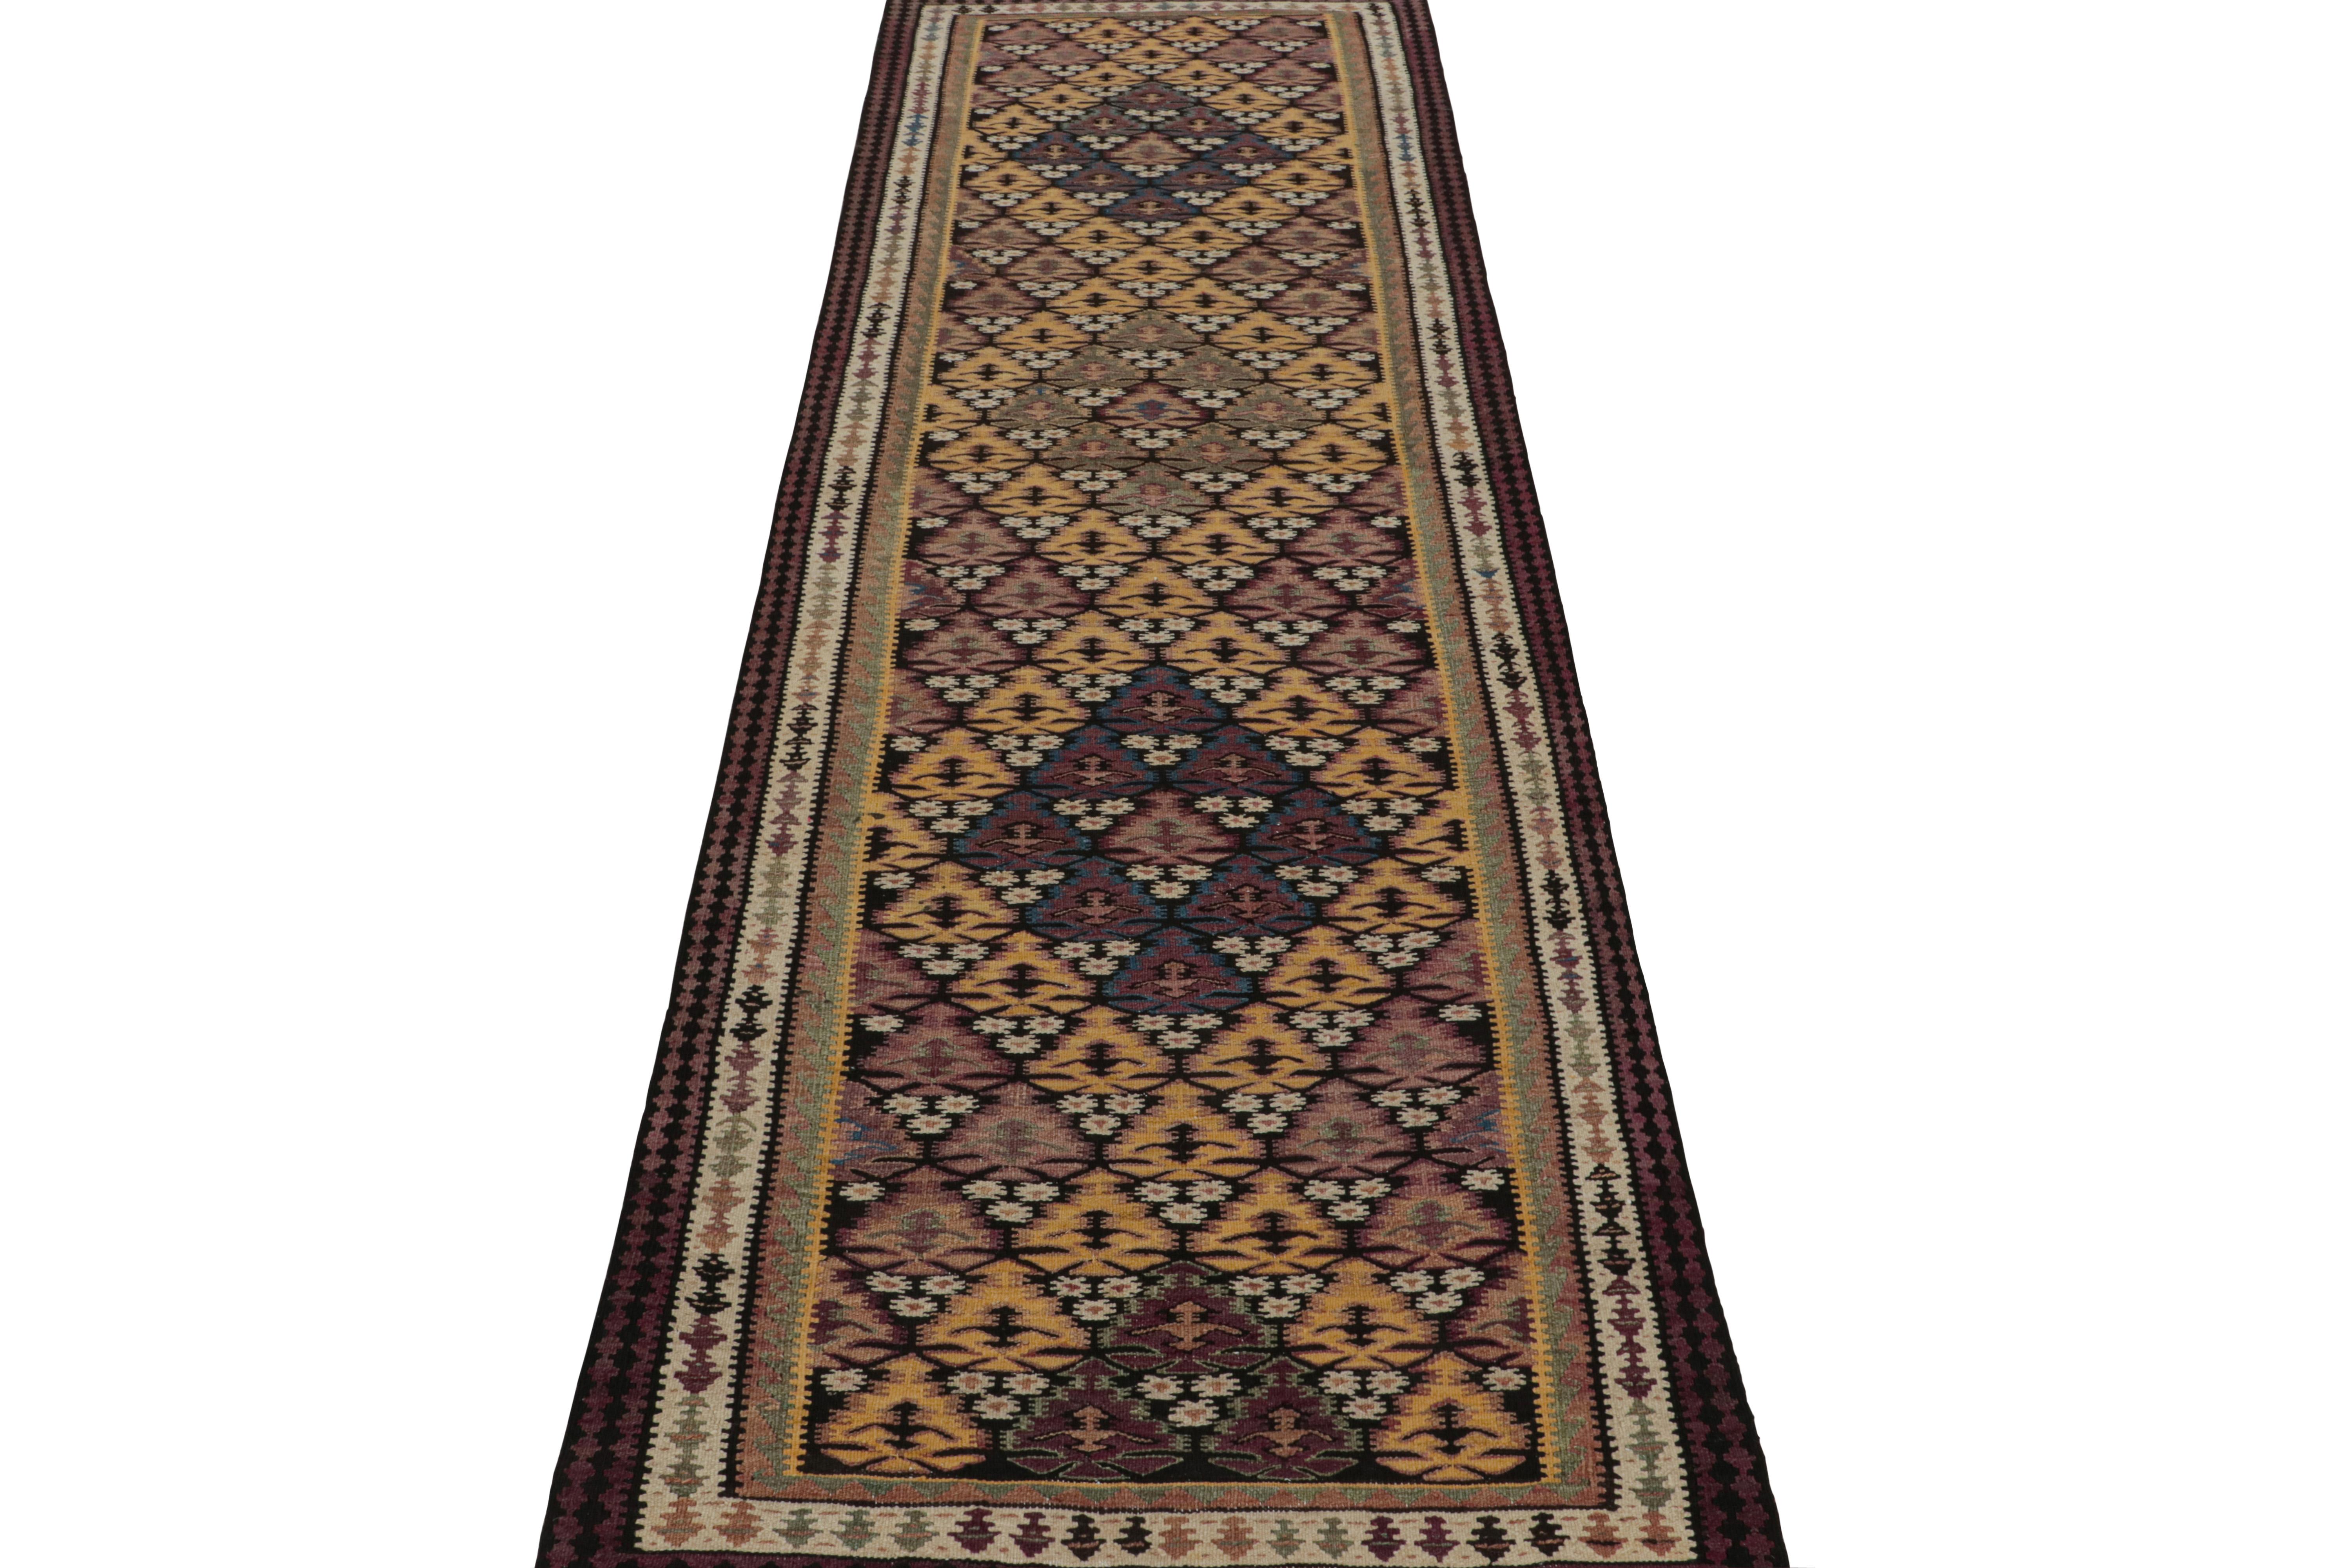 Tribal Vintage Persian Kilim in Polychromatic Geometric Patterns, from Rug & Kilim For Sale